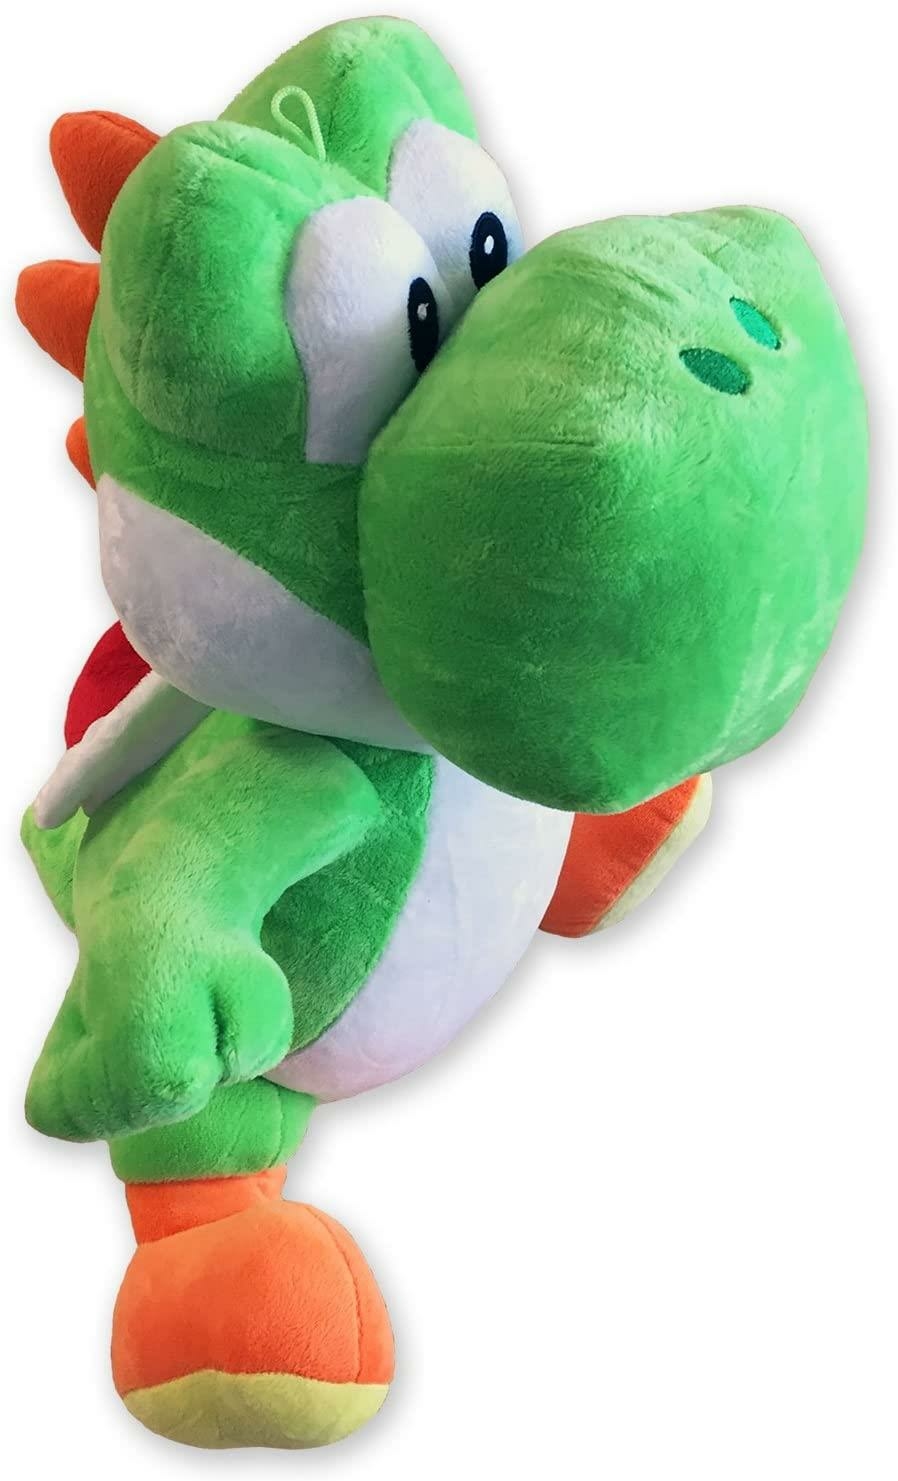 https://www.reference-gaming.com/assets/media/product/141228/nintendo-super-mario-peluche-yoshi-jumbo-50-cm.jpg?format=product-cover-large&k=1630724100